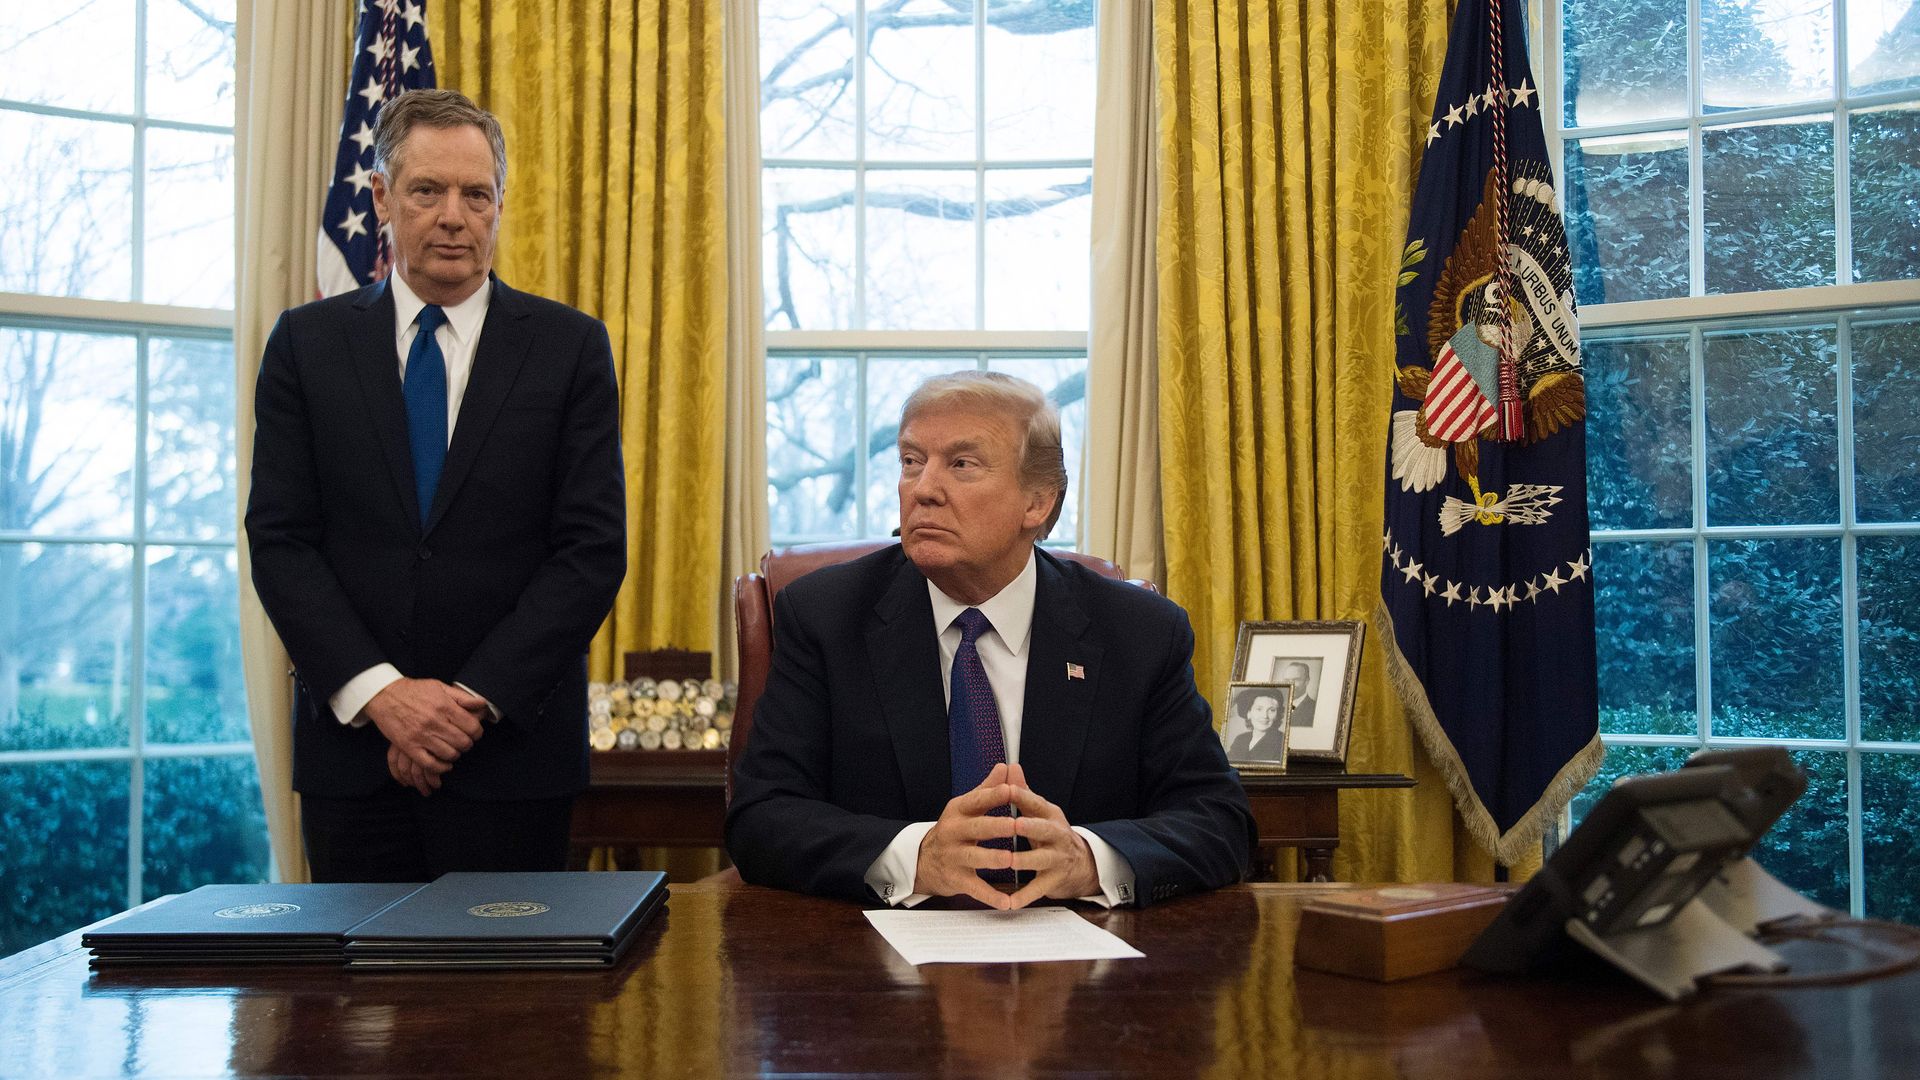 President Donald Trump sits with United States Trade Representative Robert Lighthizer in the Oval Office of the White House in Washington, DC, on January 23, 2018.